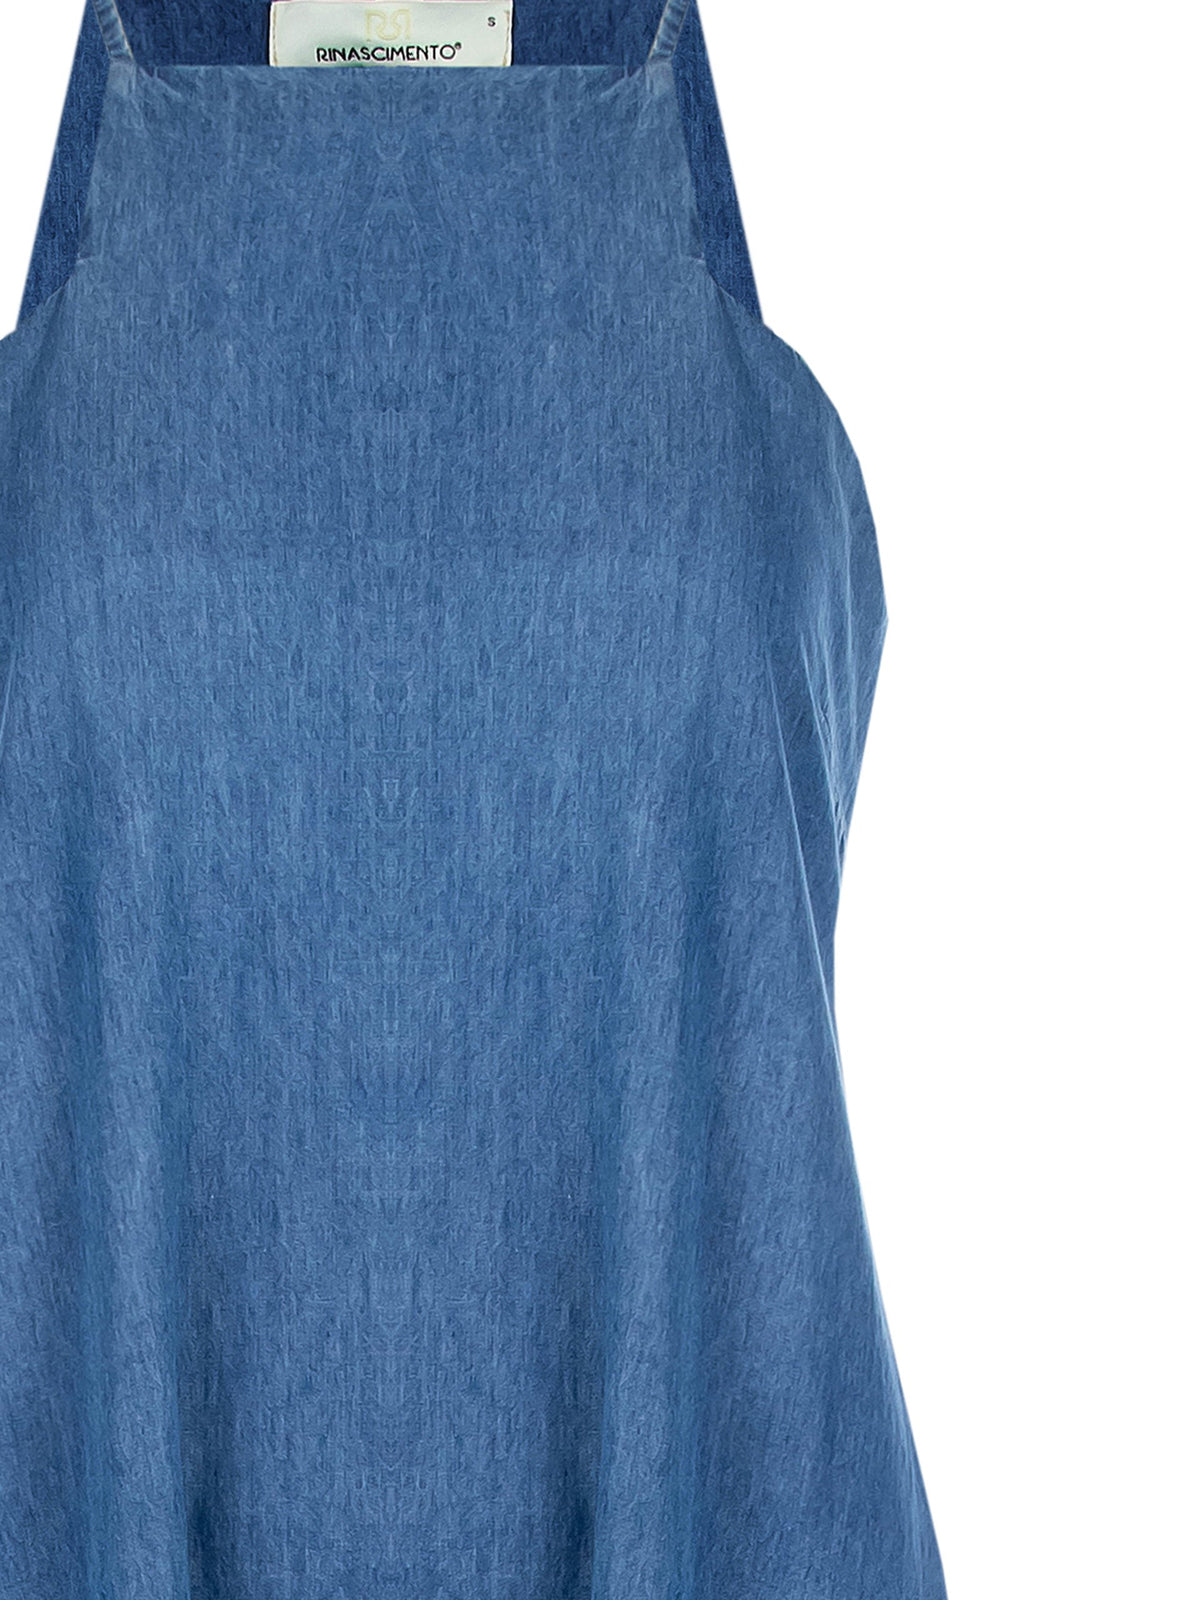 Long A-line Dress in Denim with Square Neckline and Pockets